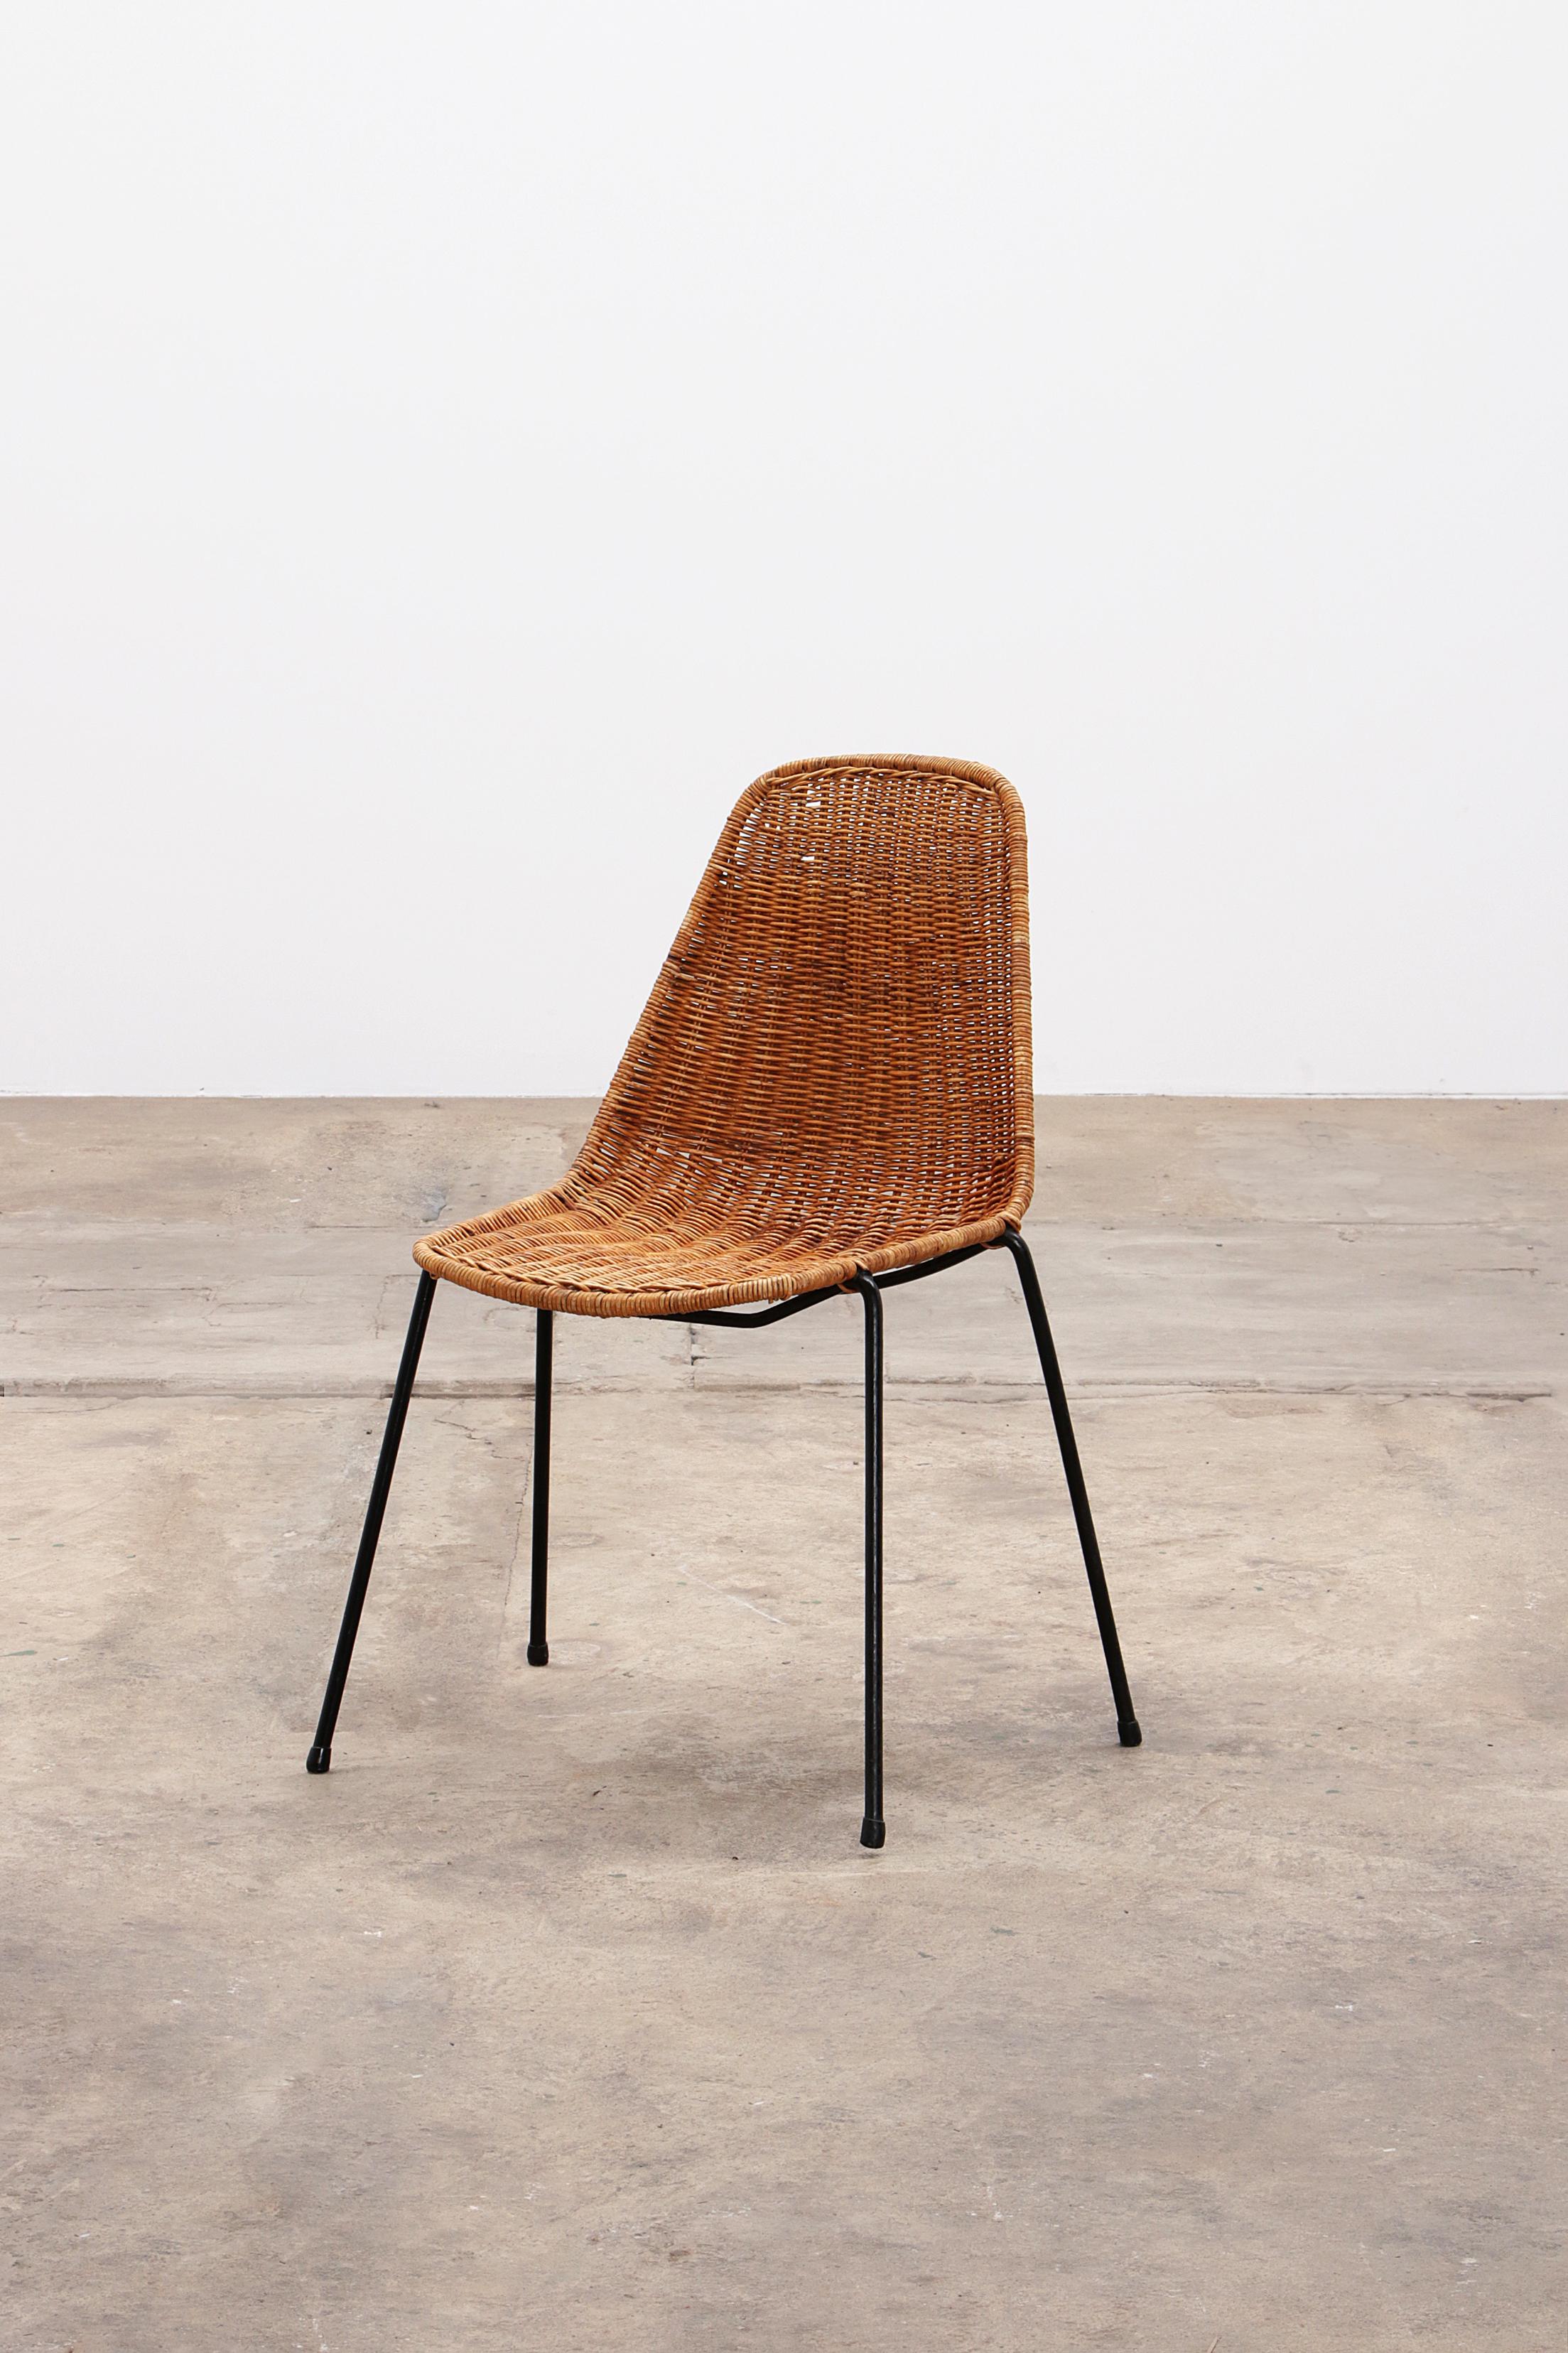 Midcentury Rattan Basket Chair by Gian Franco LeglerDiscover the elegance of the 1950s with this authentic midcentury rattan Basket chair, designed by Gian Franco Legler. This chair, originally made for the Italian restaurant 